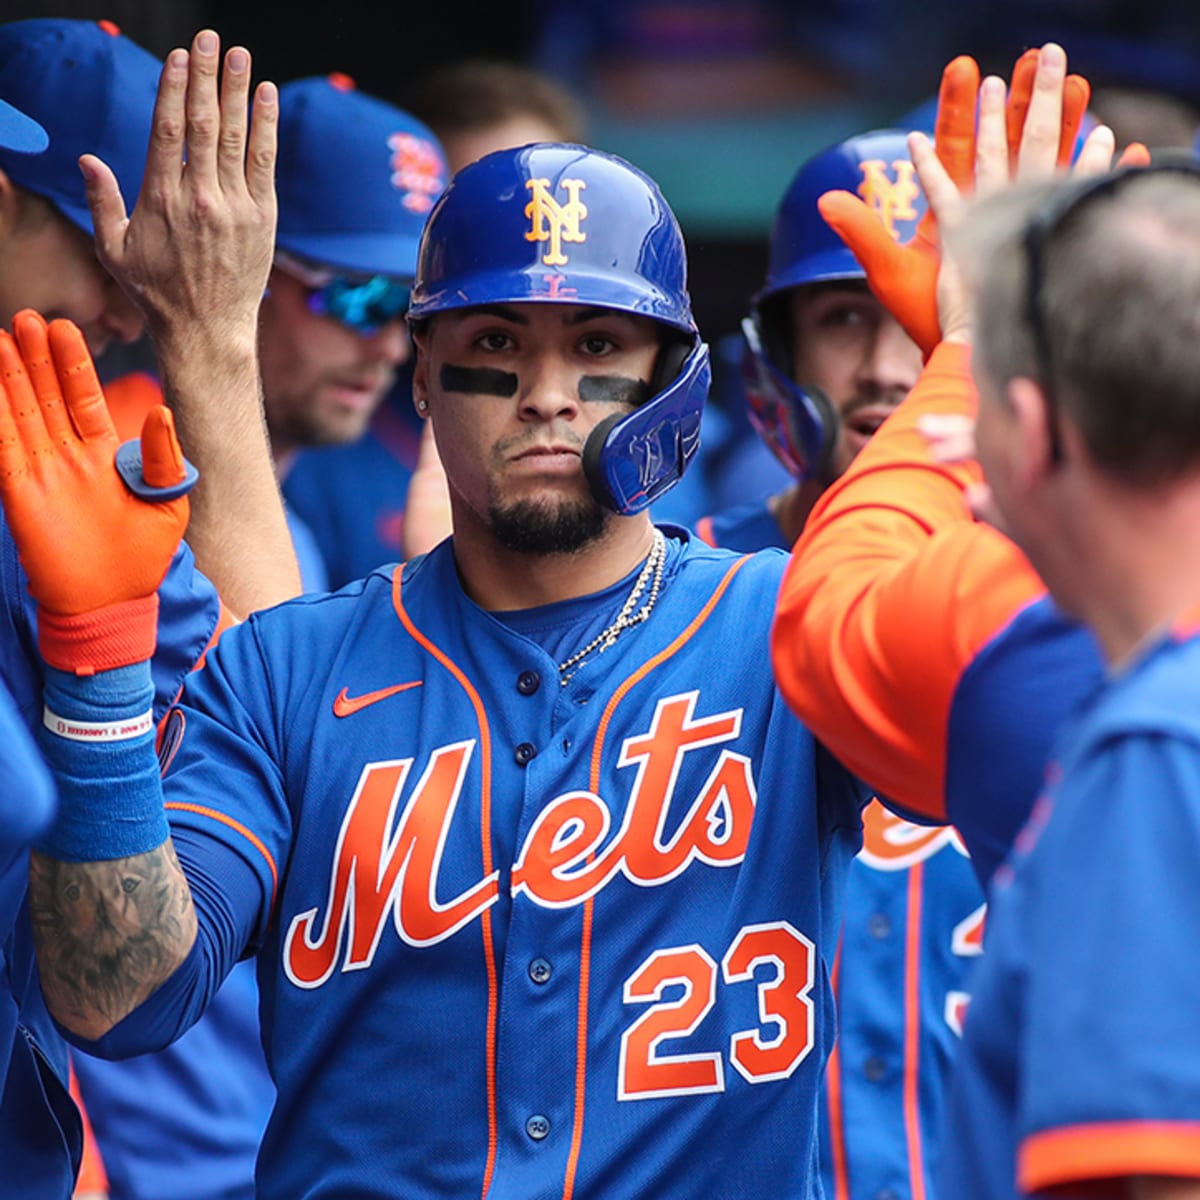 Mets Give Their Fans a Thumbs-Down During Win - The New York Times